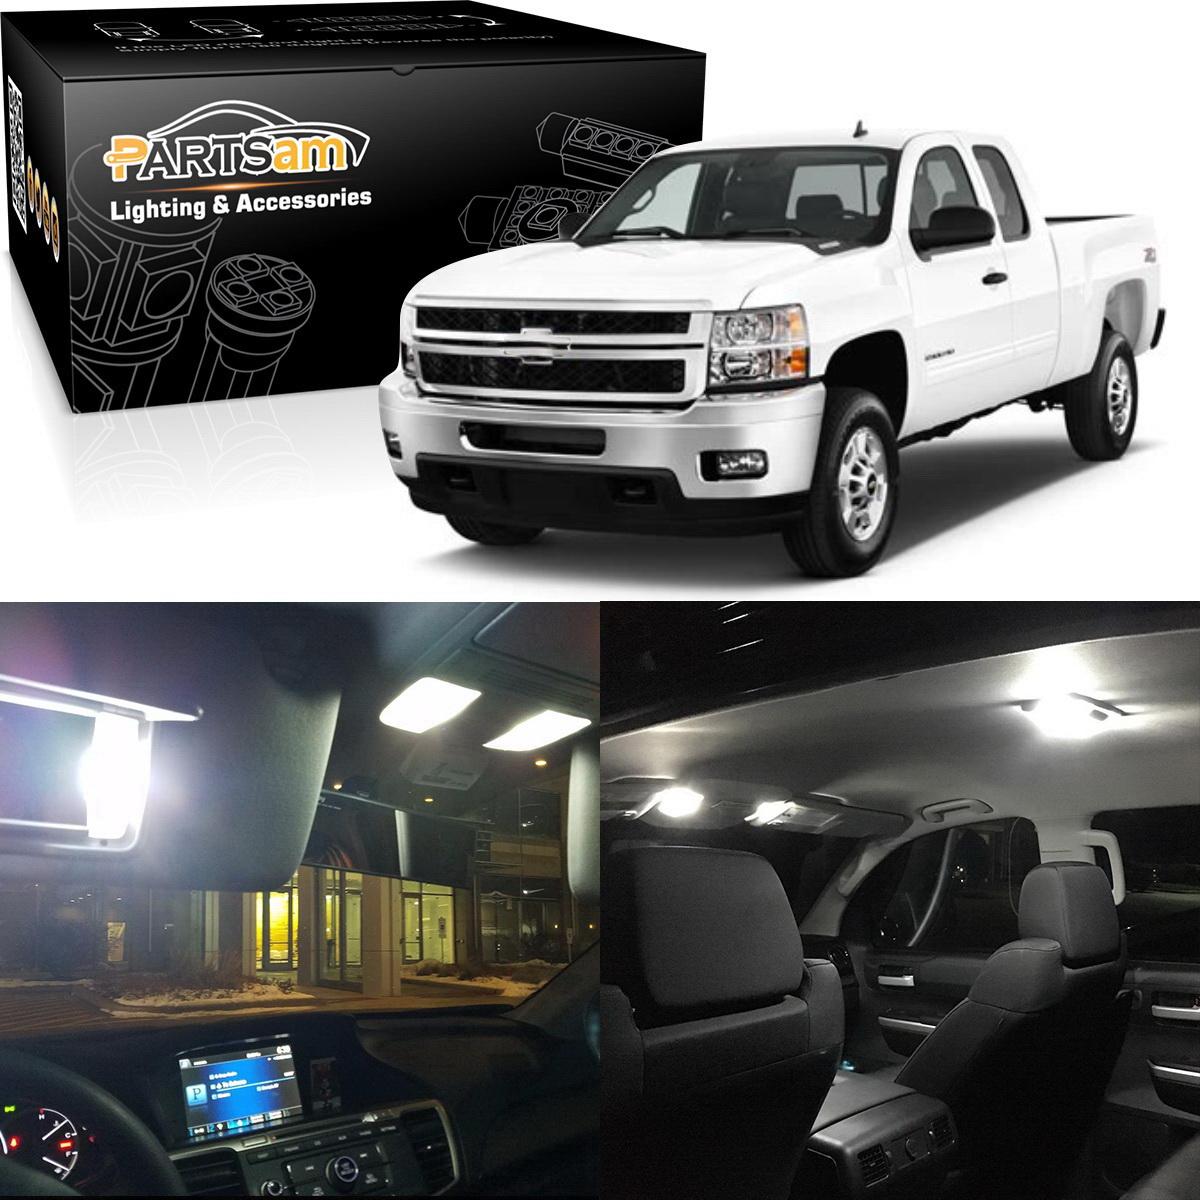 Details About 12xbright White Interior Led Light Package Kit For Chevrolet Silverado 07 13 Map